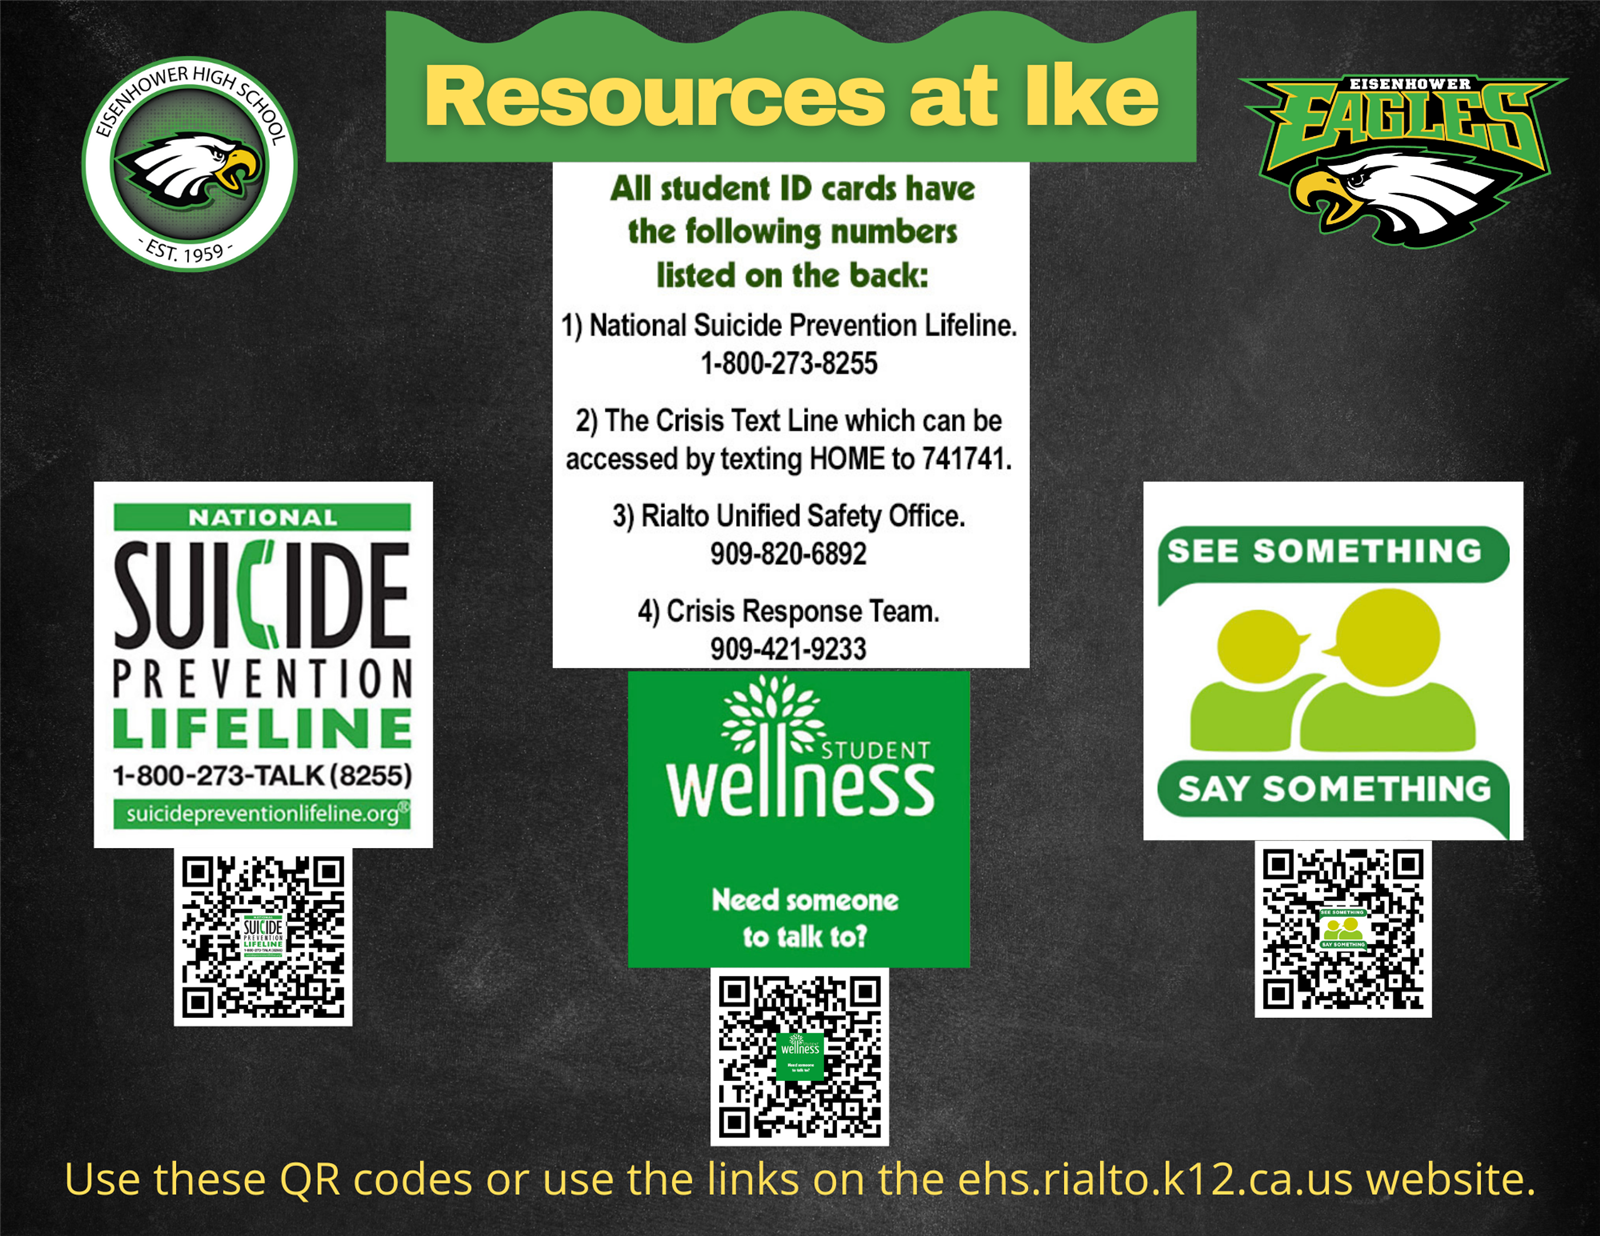 wellness resources at Ike